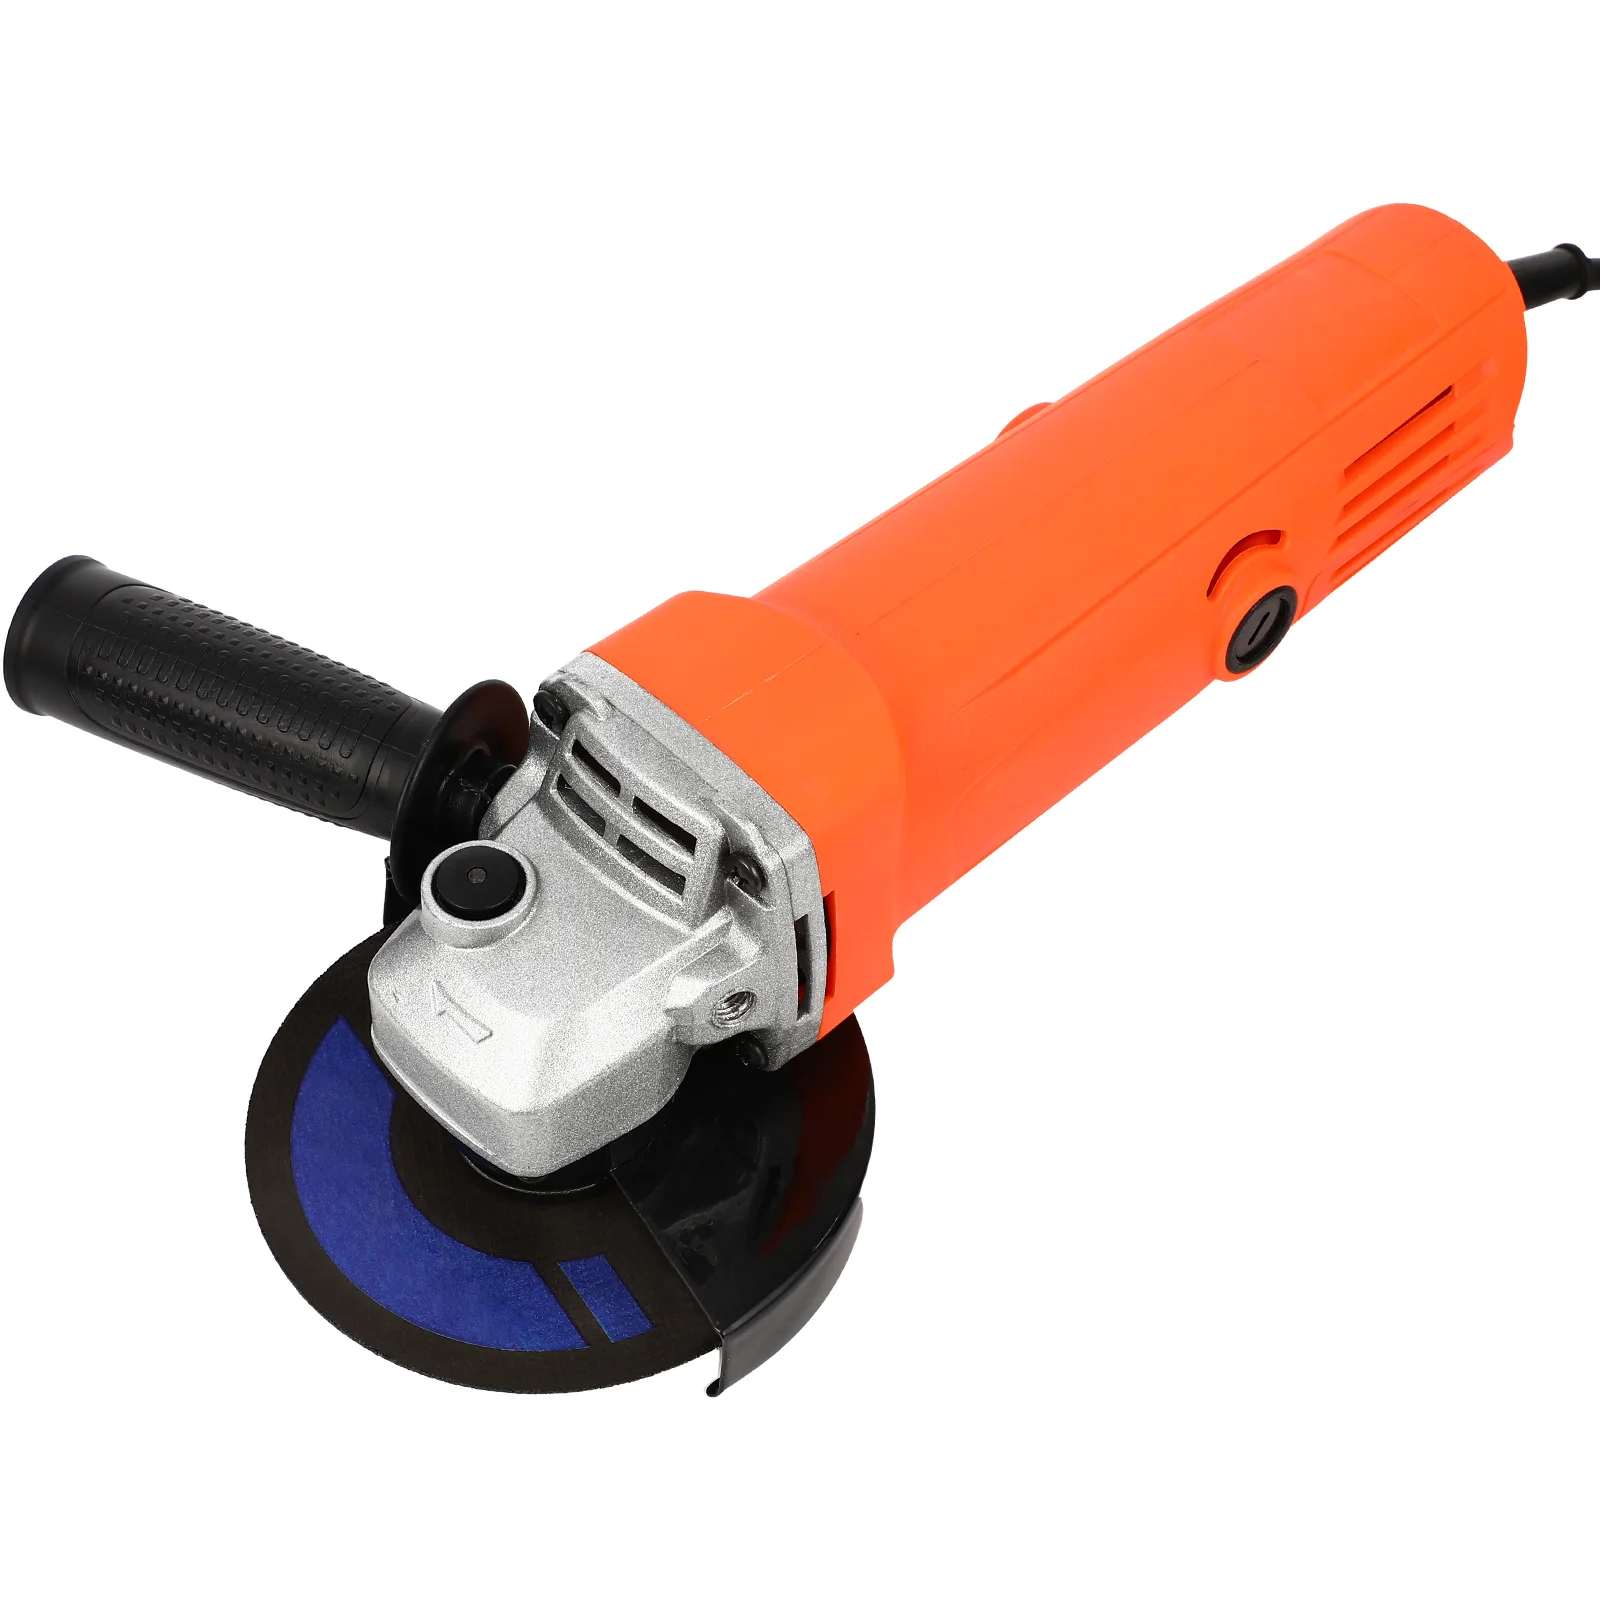 

Polishing Machine Metal Sander Electric Sanding Tool Grinding With Wheel Aluminum Alloy Corded Angle Grinder